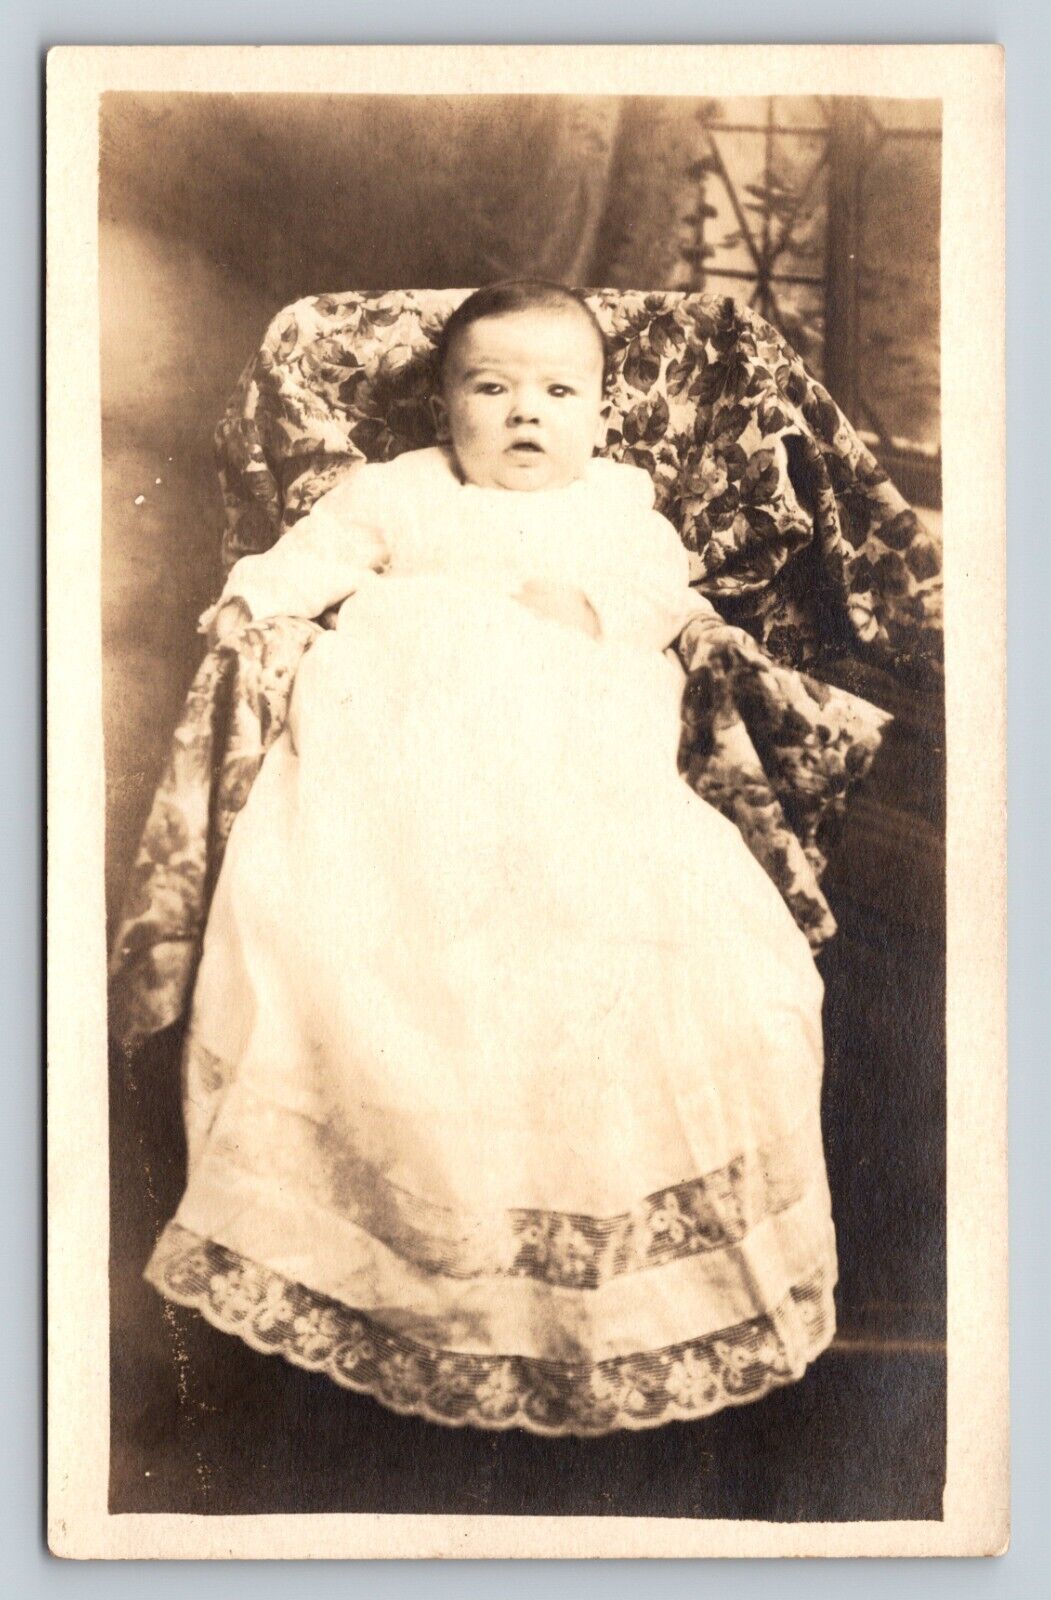 RPPC Infant Boy in White Gown on Floral Blanket AZO 1918-1930 VTG Postcard 1537